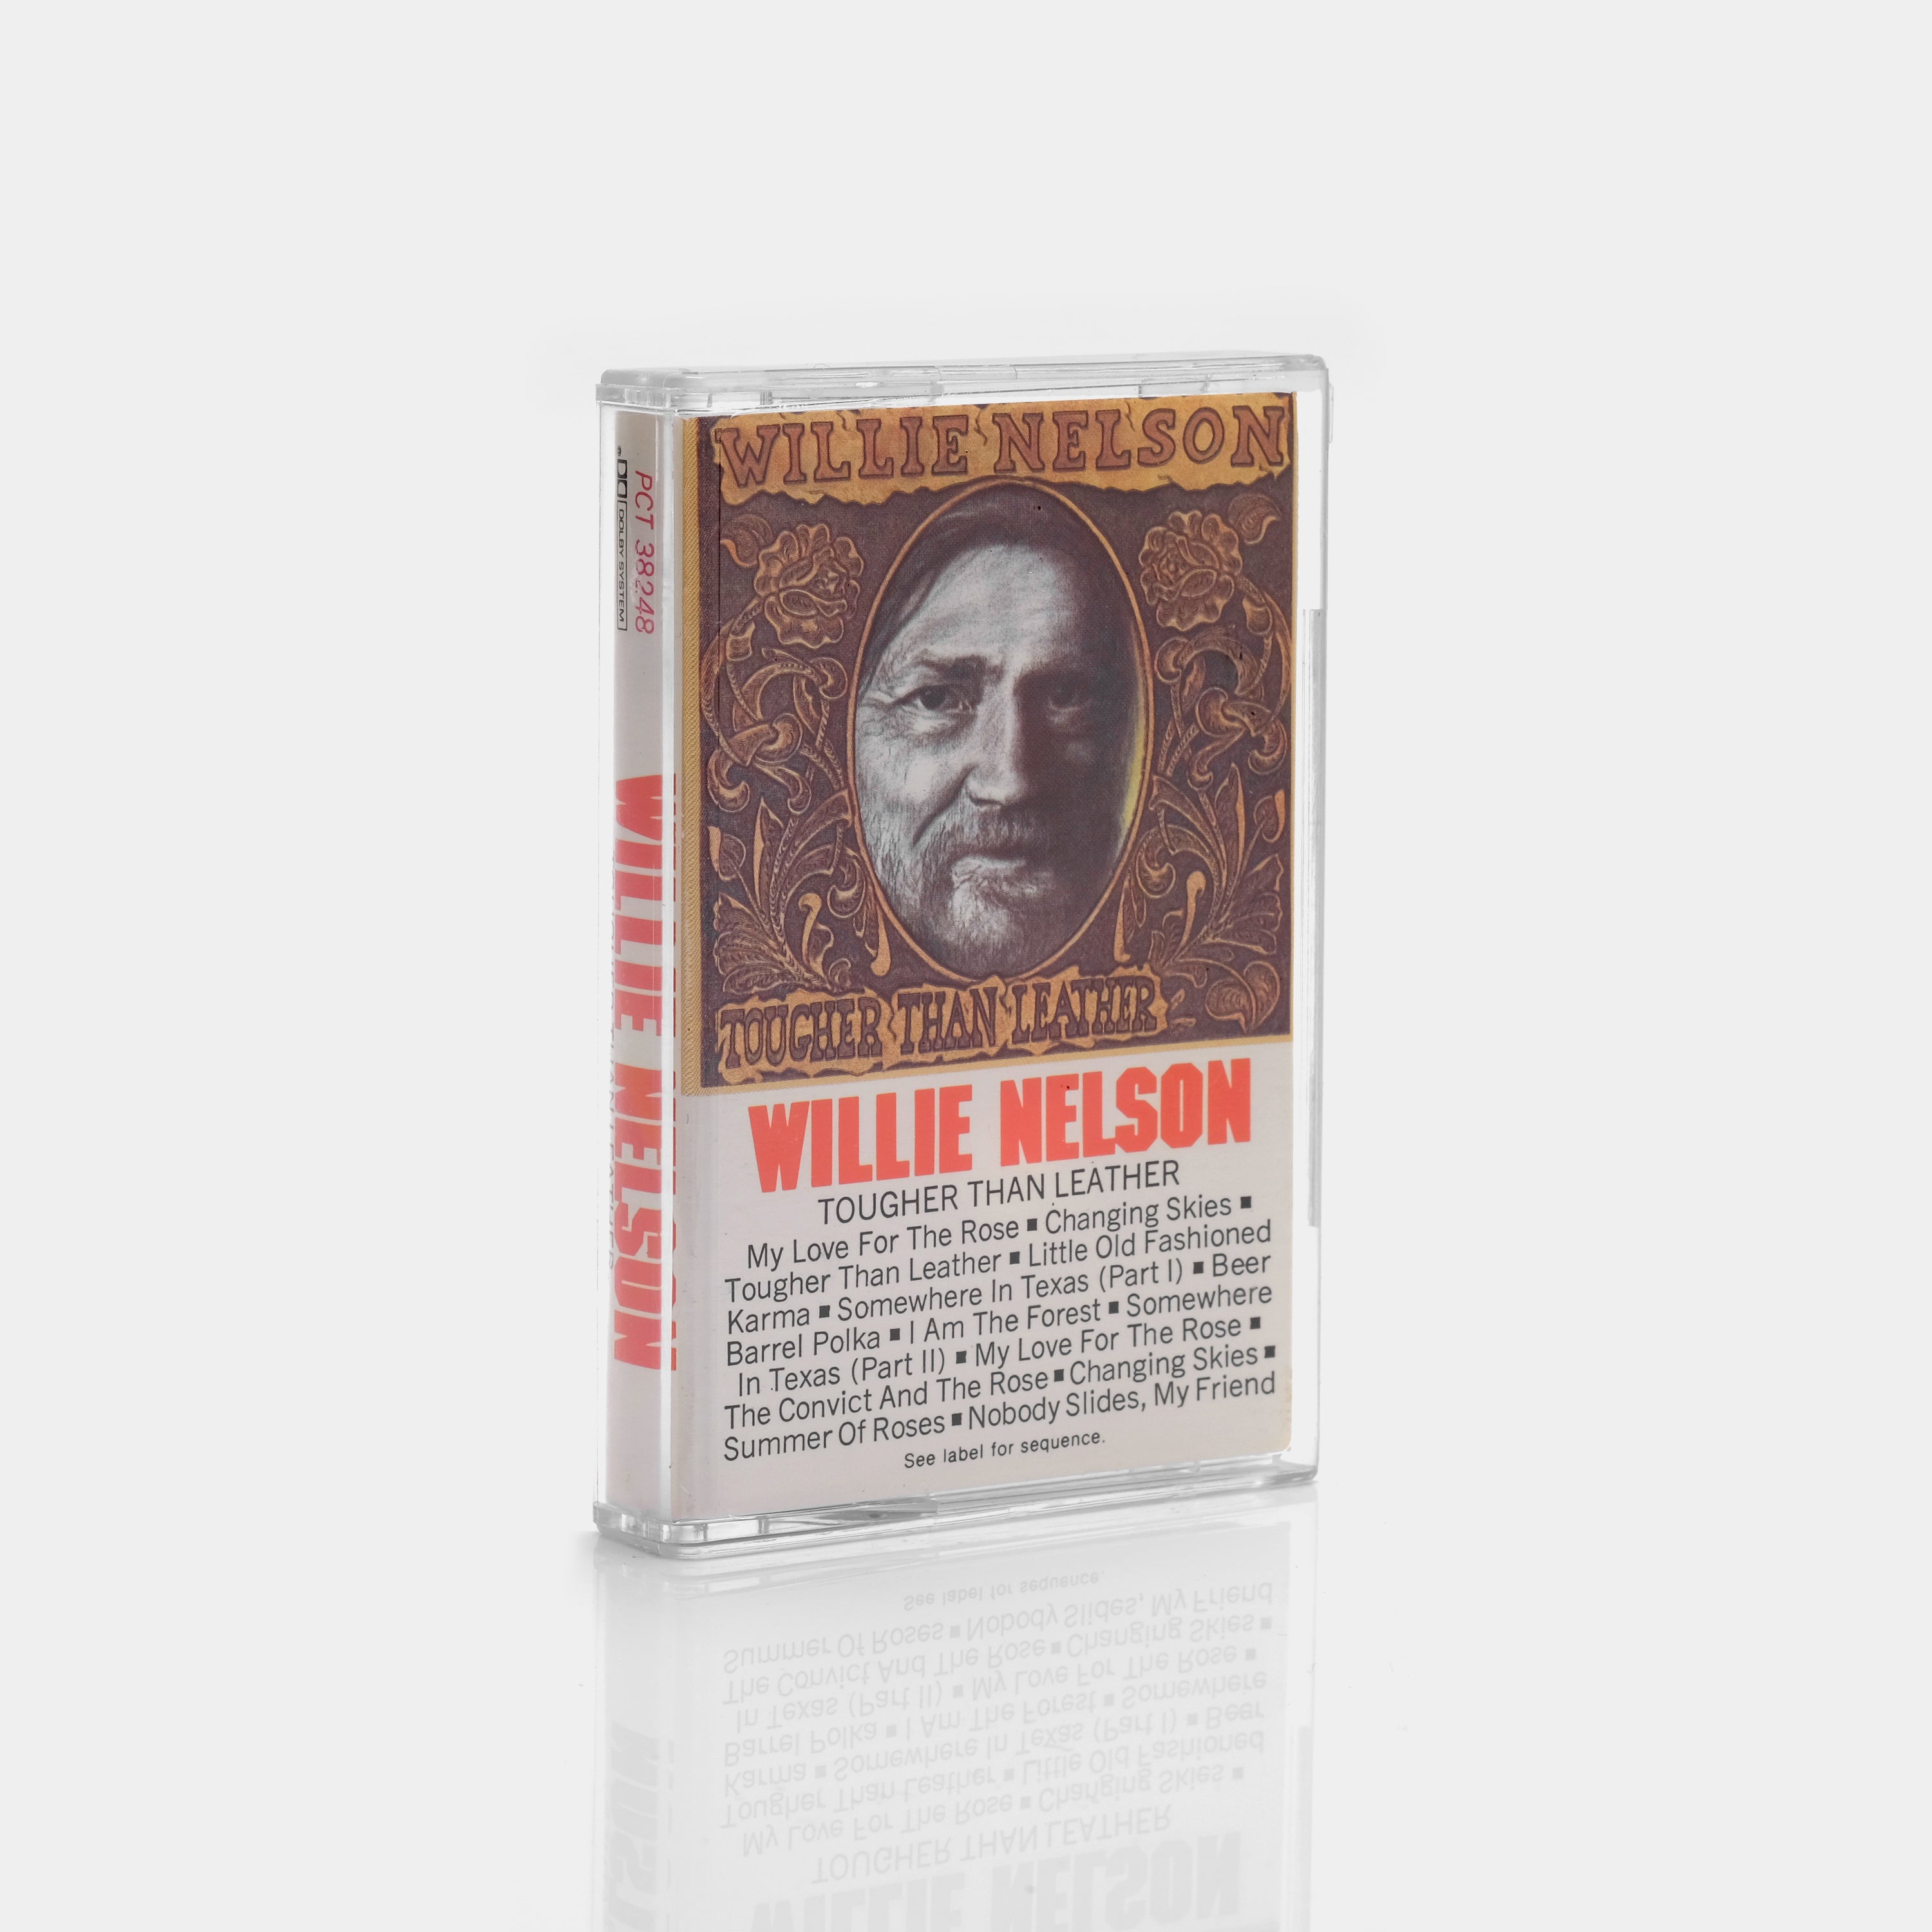 Willie Nelson - Tougher Than Leather Cassette Tape